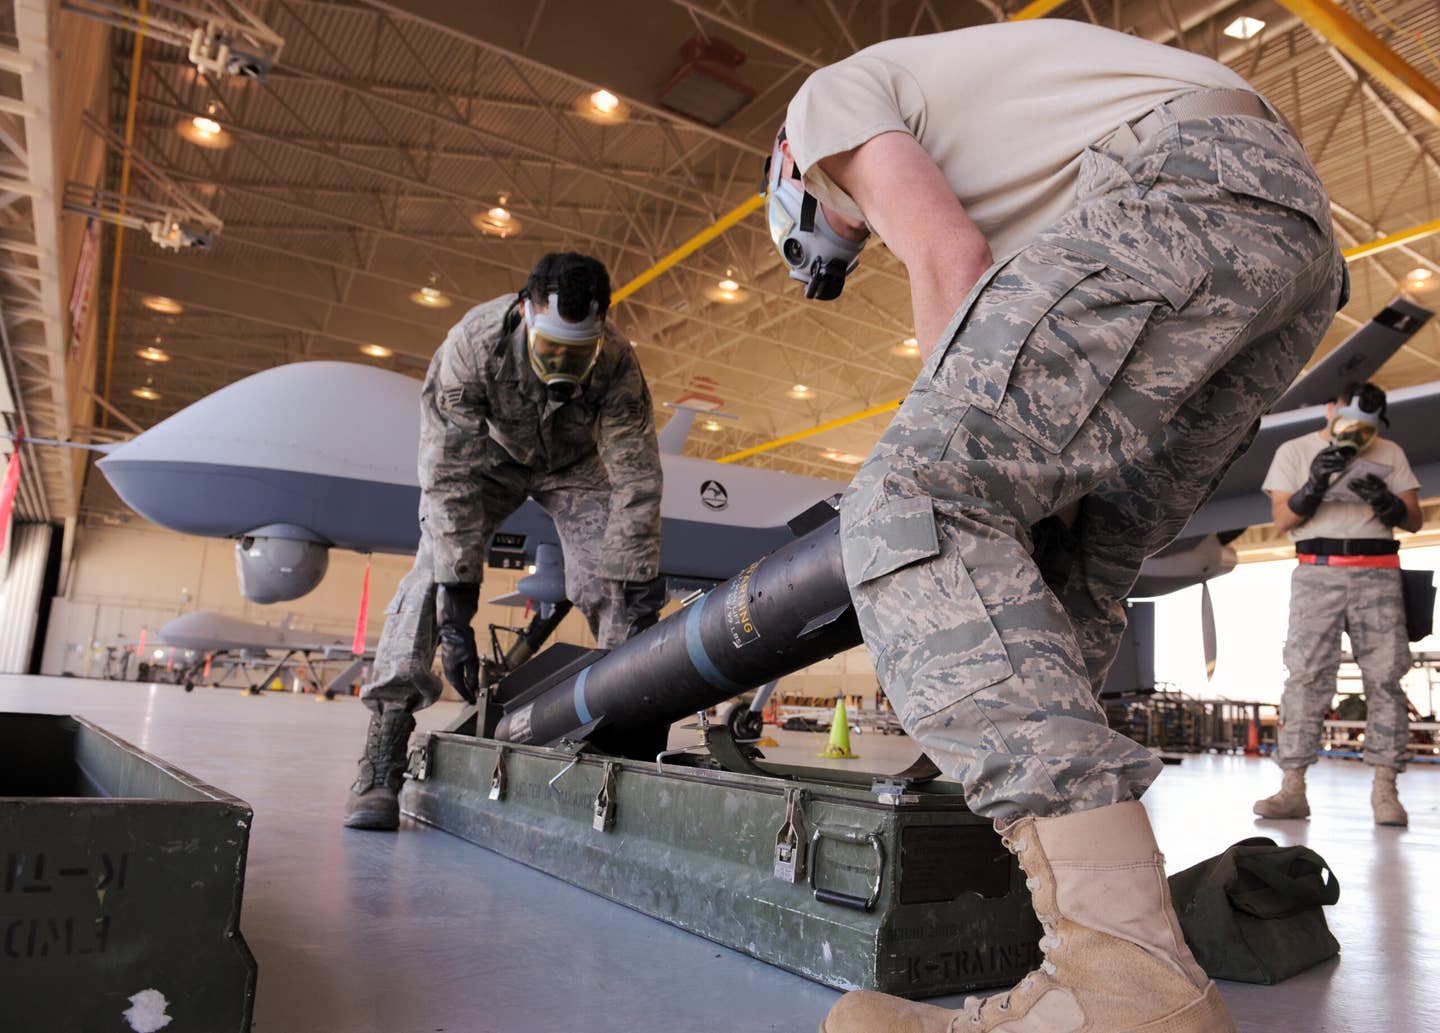 U.S. Air Force ground crew prepare to load an AGM-114 Hellfire air-to-ground missile onto an MQ-9 Reaper during weapons load training at Creech Air Force Base, Nevada. <em>U.S. Air Force photo/Senior Airman Larry E. Reid Jr.</em>